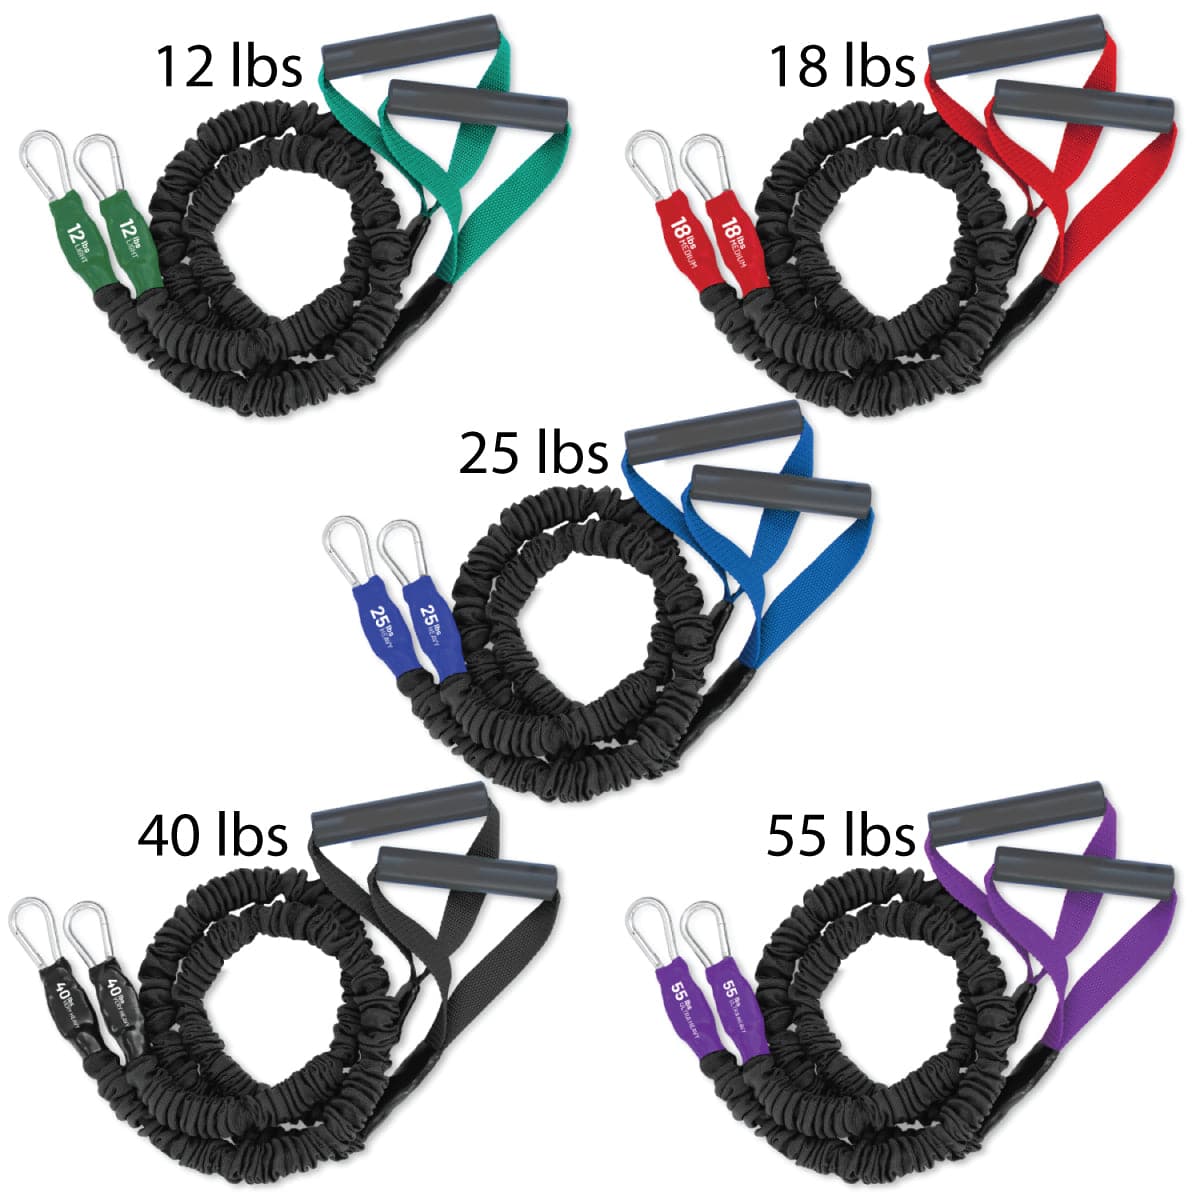 X-Over Resistance Band 5 Packs